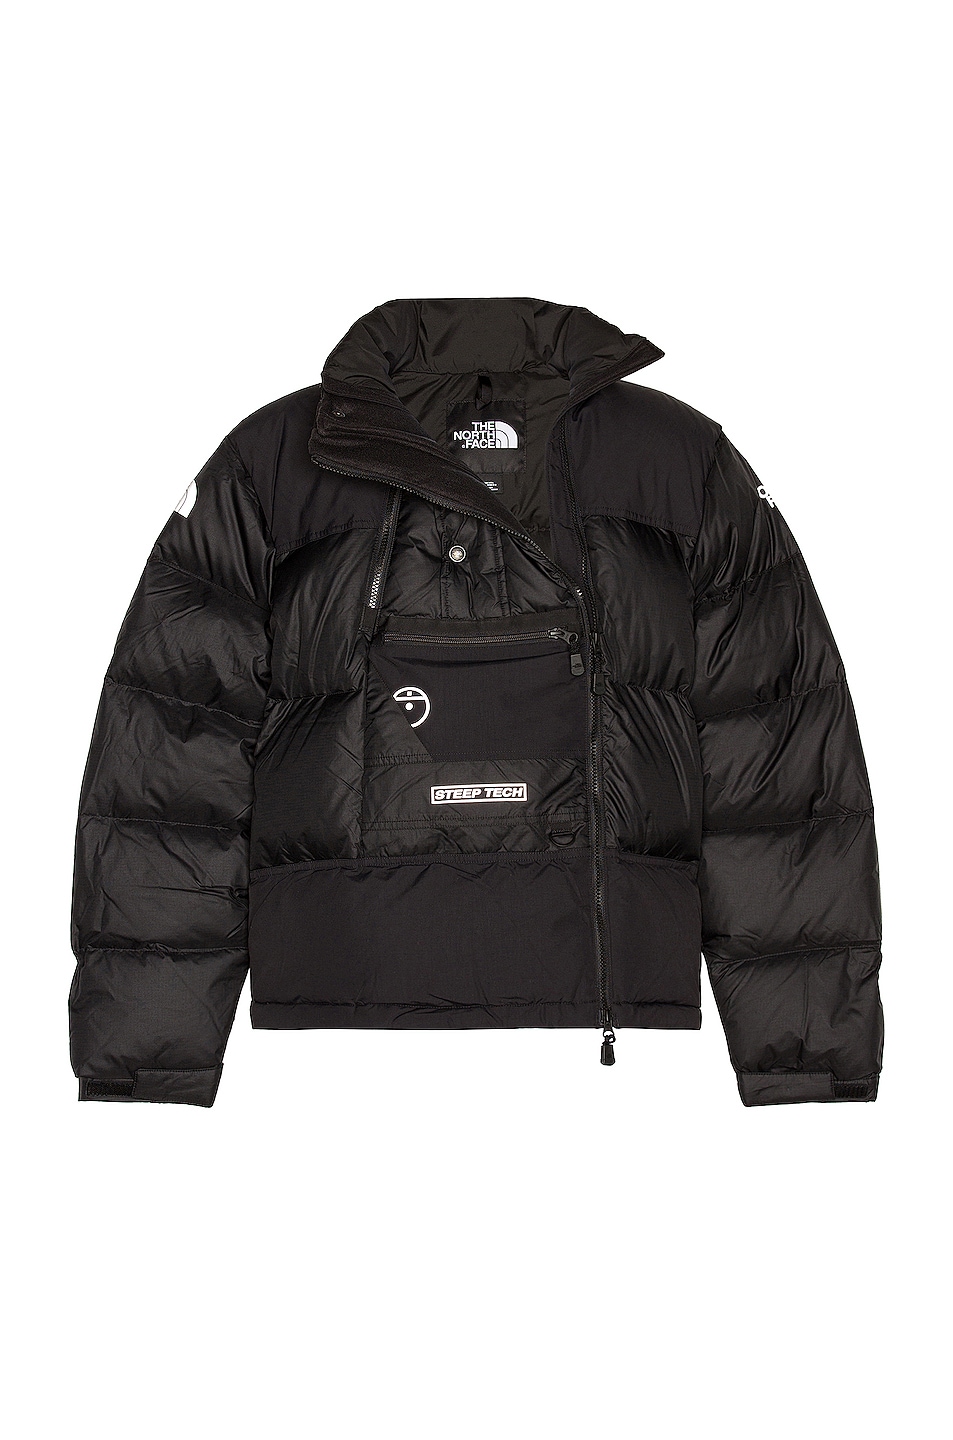 The North Face Black Steep Tech Down Jacket in TNF Black | FWRD